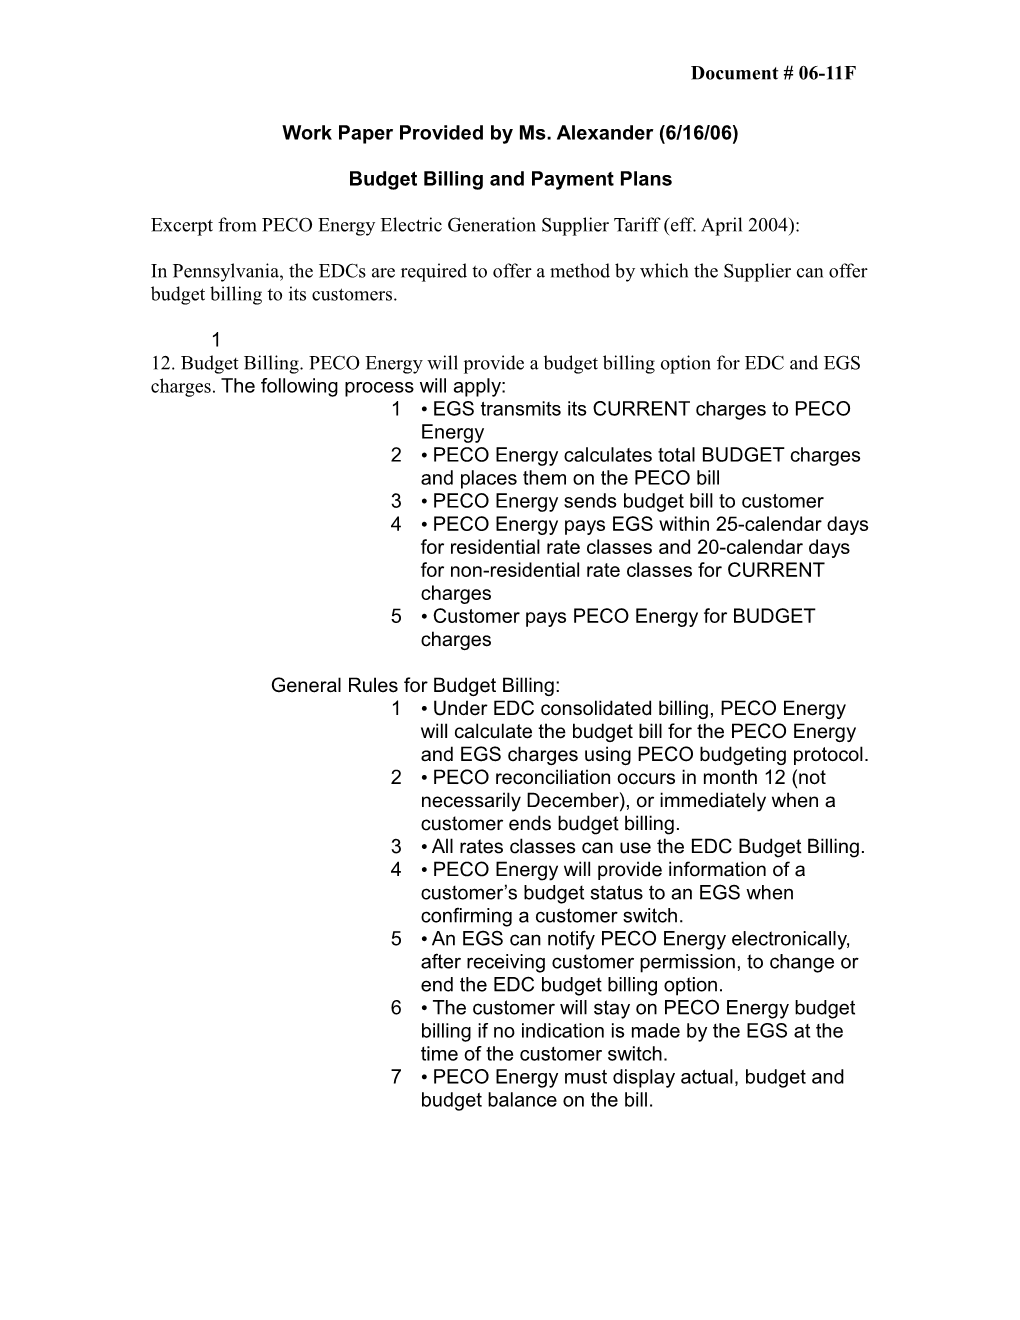 Excerpt from PECO Energy Electric Generation Supplier Tariff (Eff